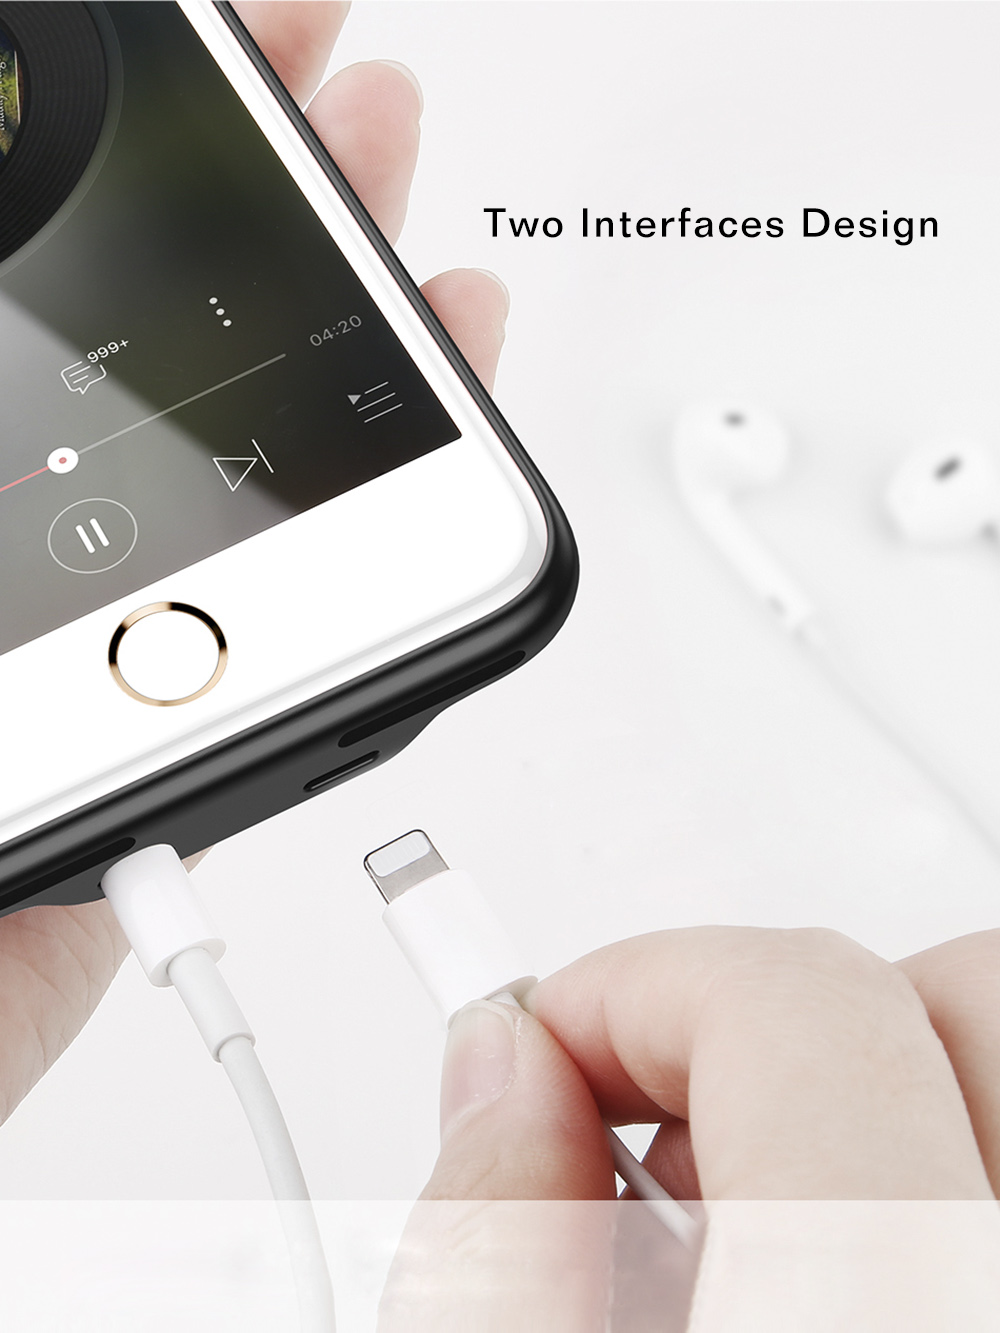 Baseus Audio Case Double IP Interfaces PC TPU for iPhone 7 / 8  